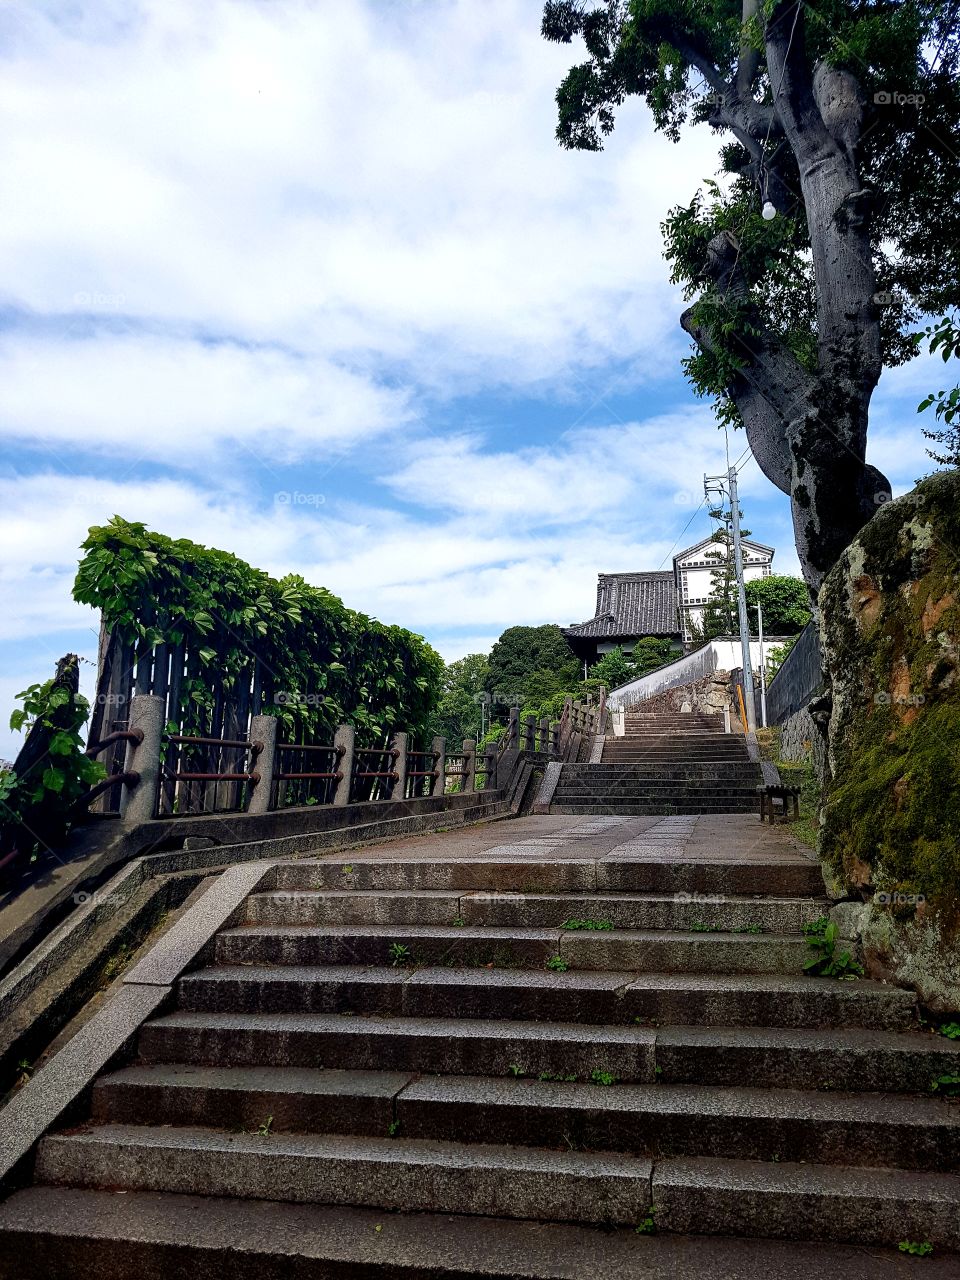 The stairs leading up to the 1700+ year old Aichi shrine